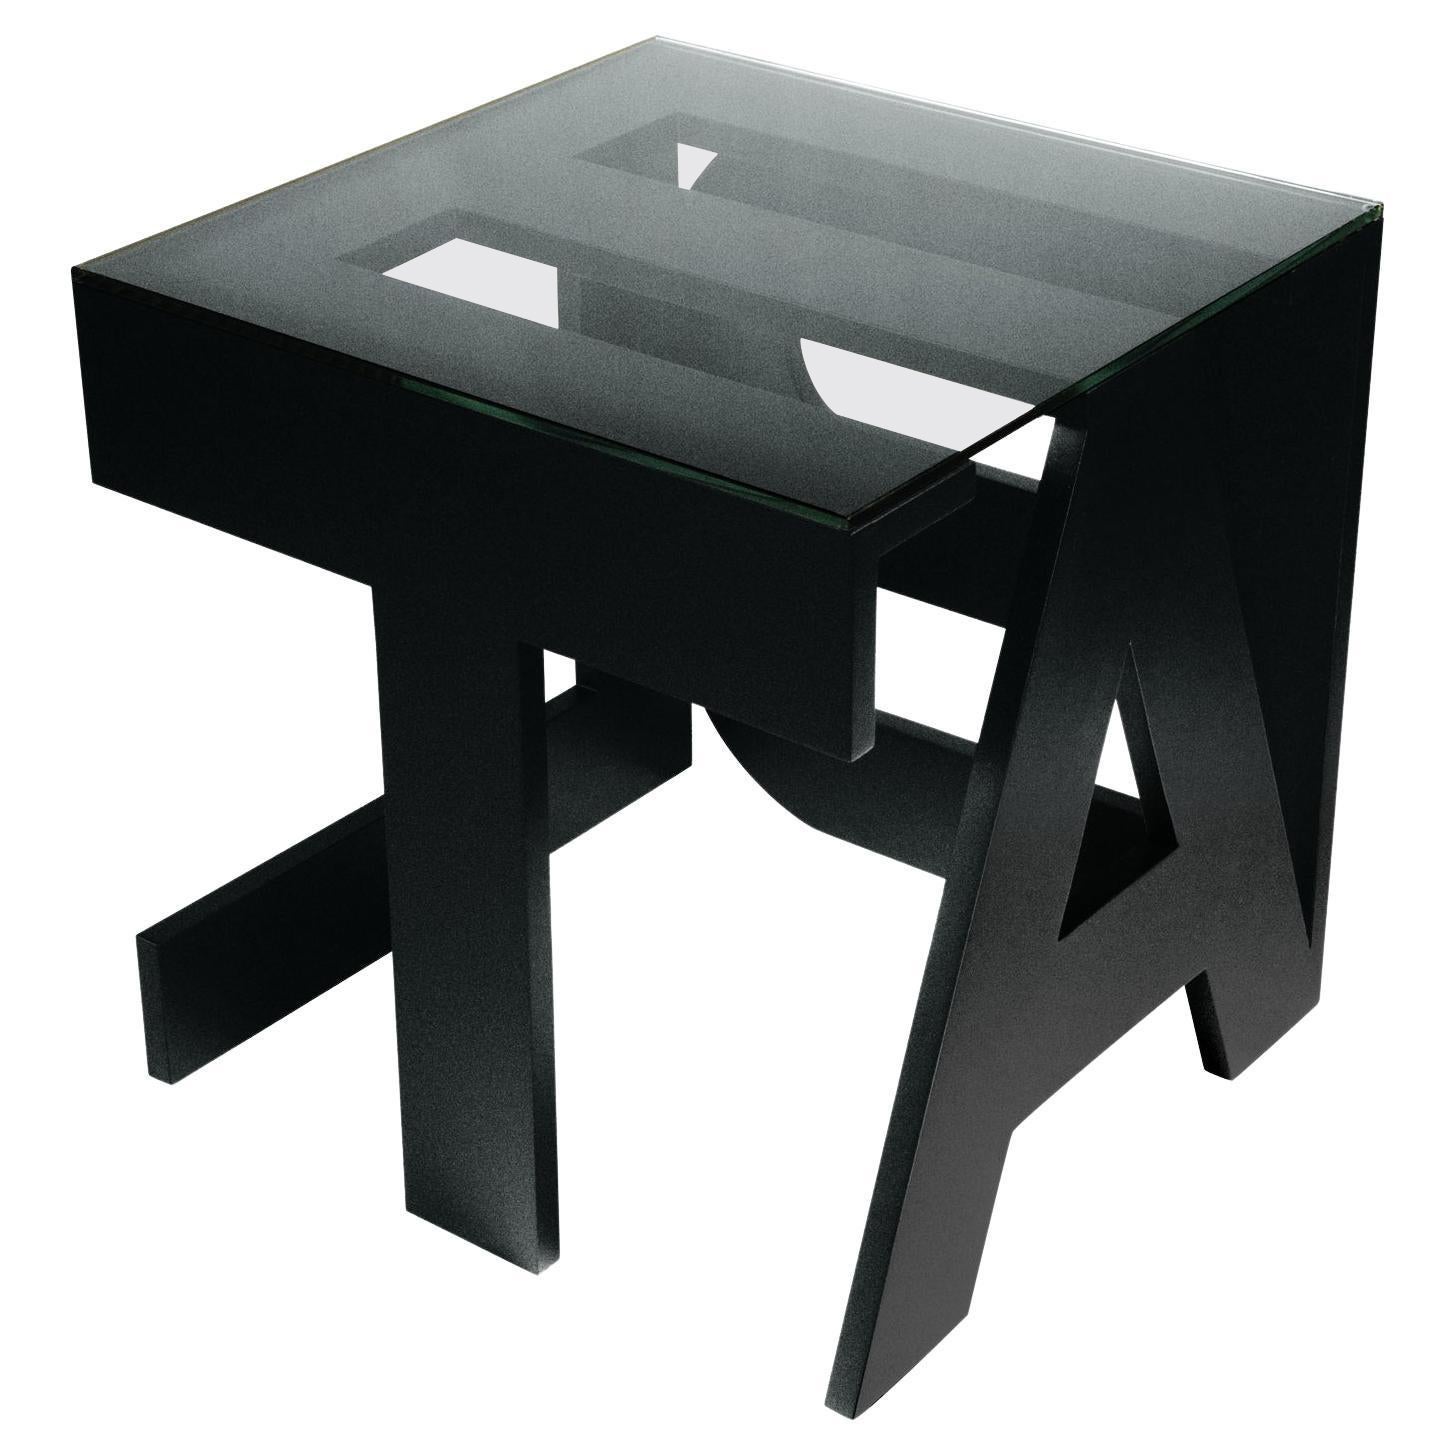 Black "Table" Table by Roberta Rampazzo